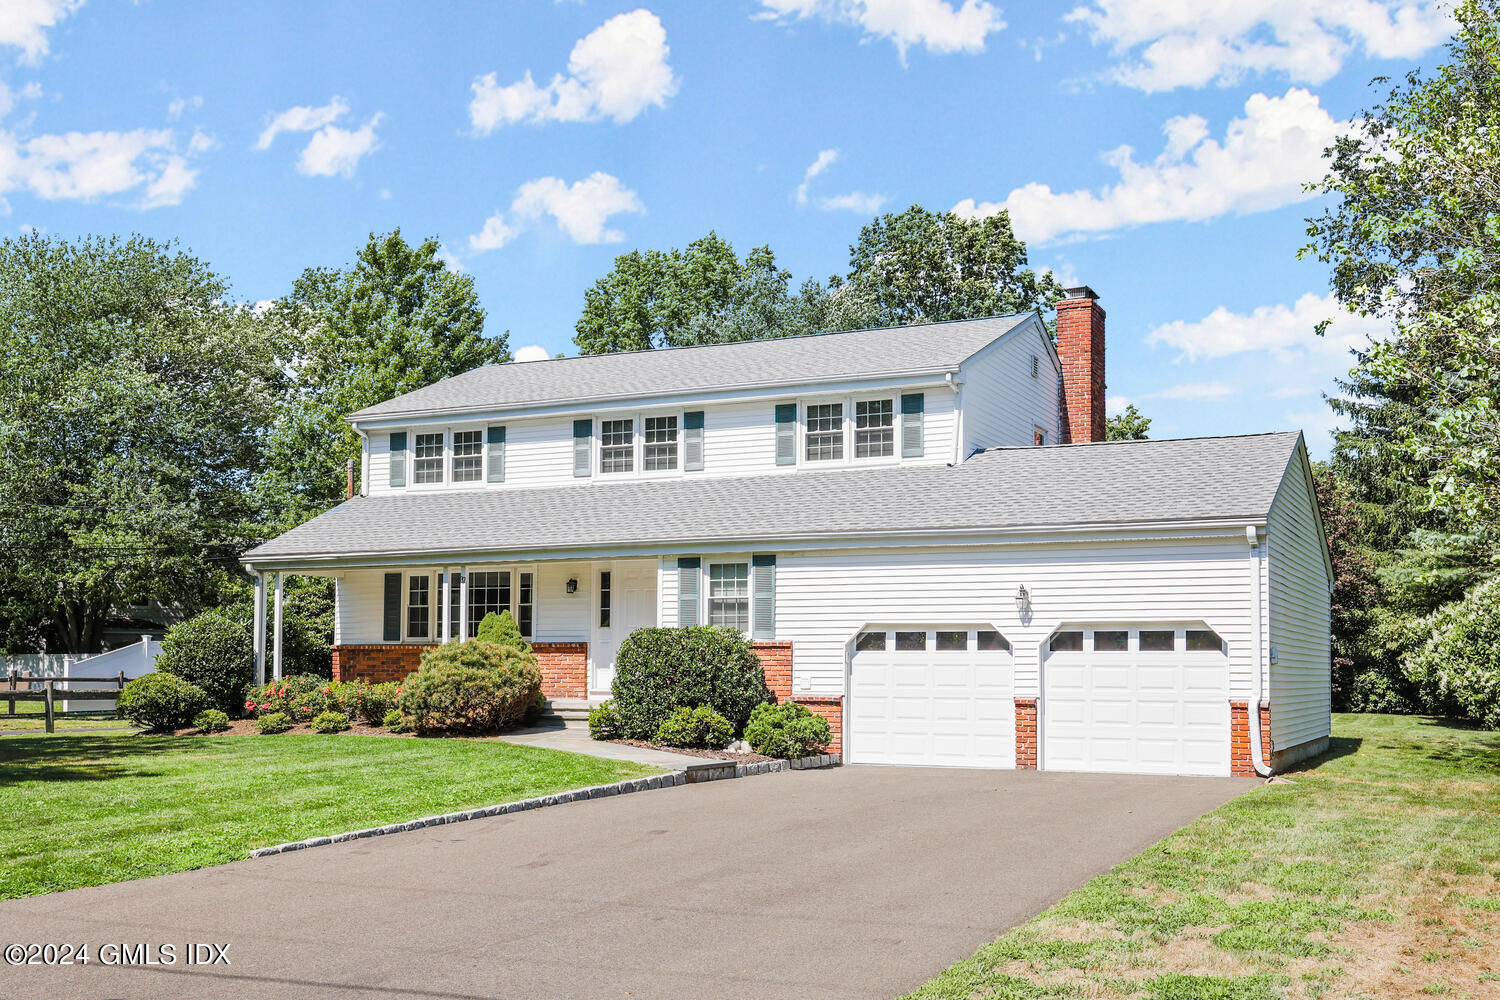 Rental Property at 32 Rainbow Drive, Riverside, Connecticut - Bedrooms: 4 
Bathrooms: 3  - $9,200 MO.